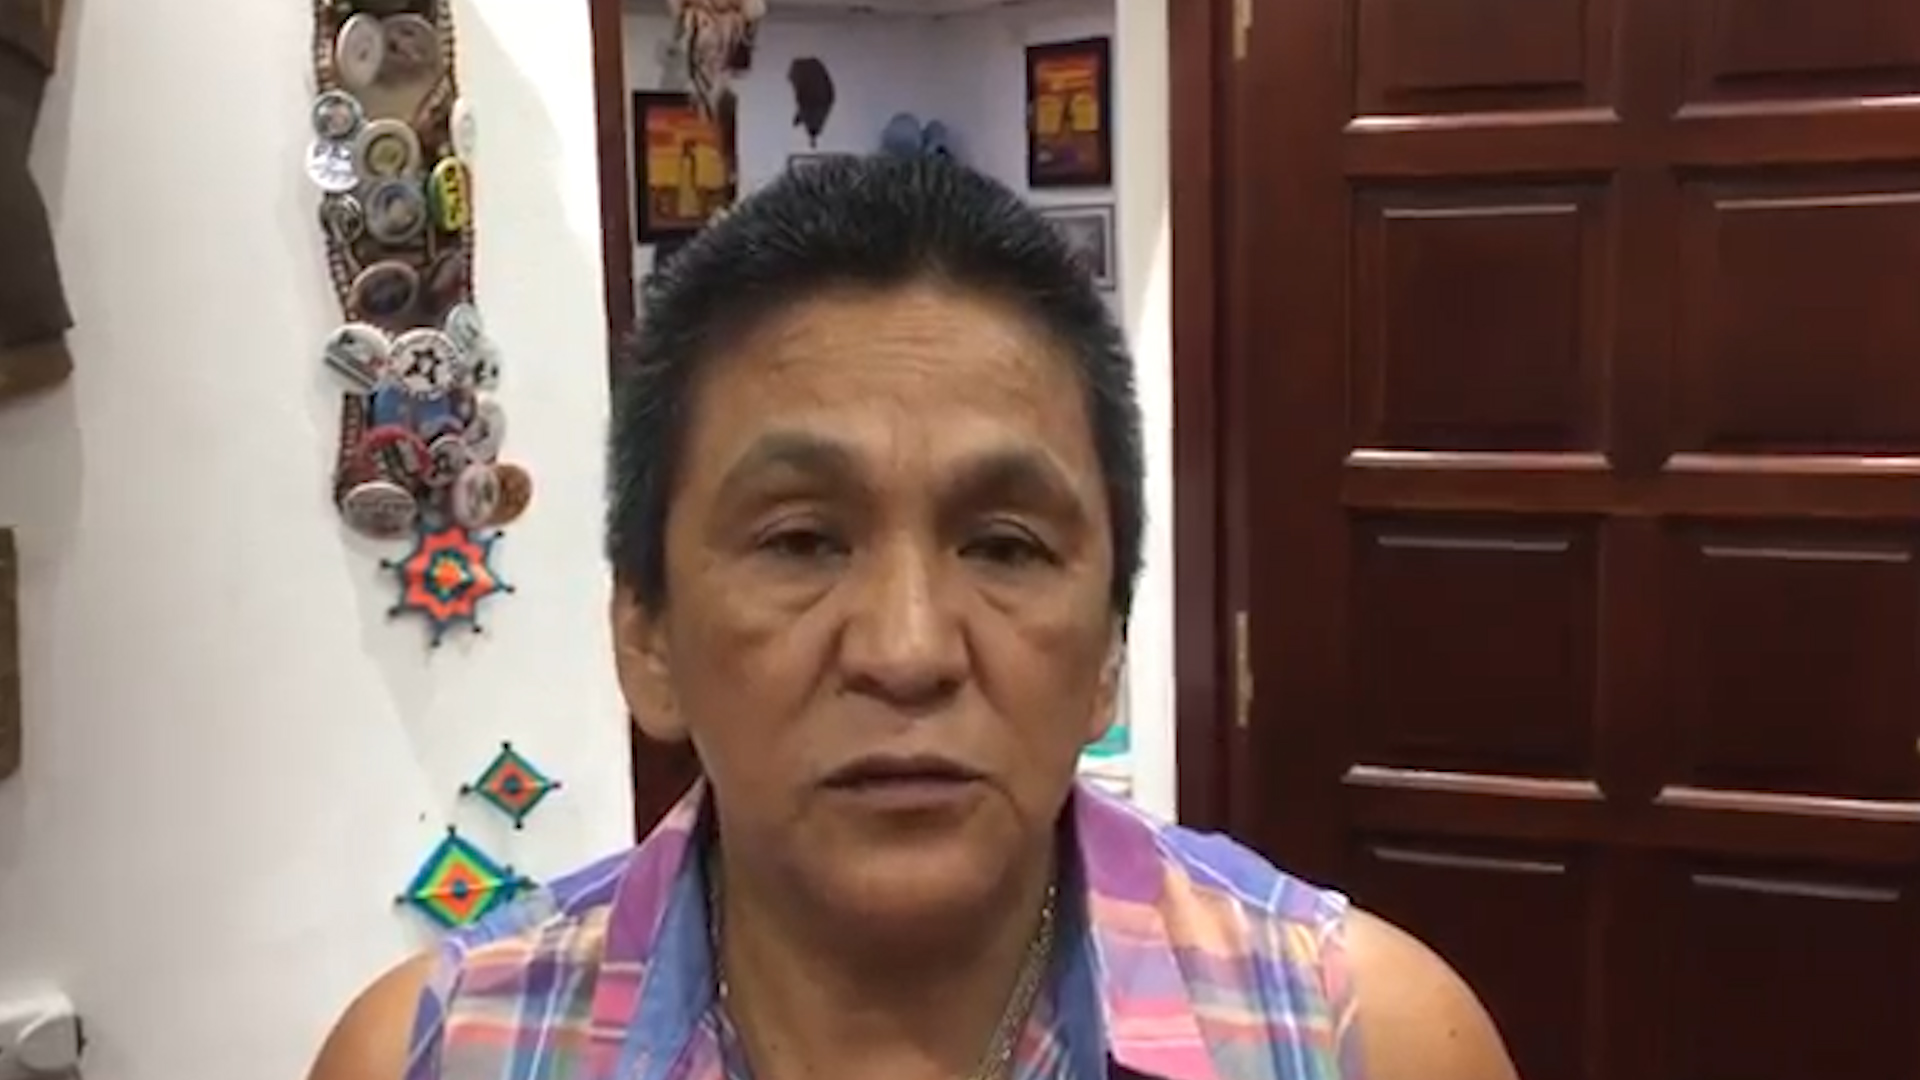 Milagro Sala is under house arrest as part of the case "villeros kids" for which she was sentenced to 13 years in prison